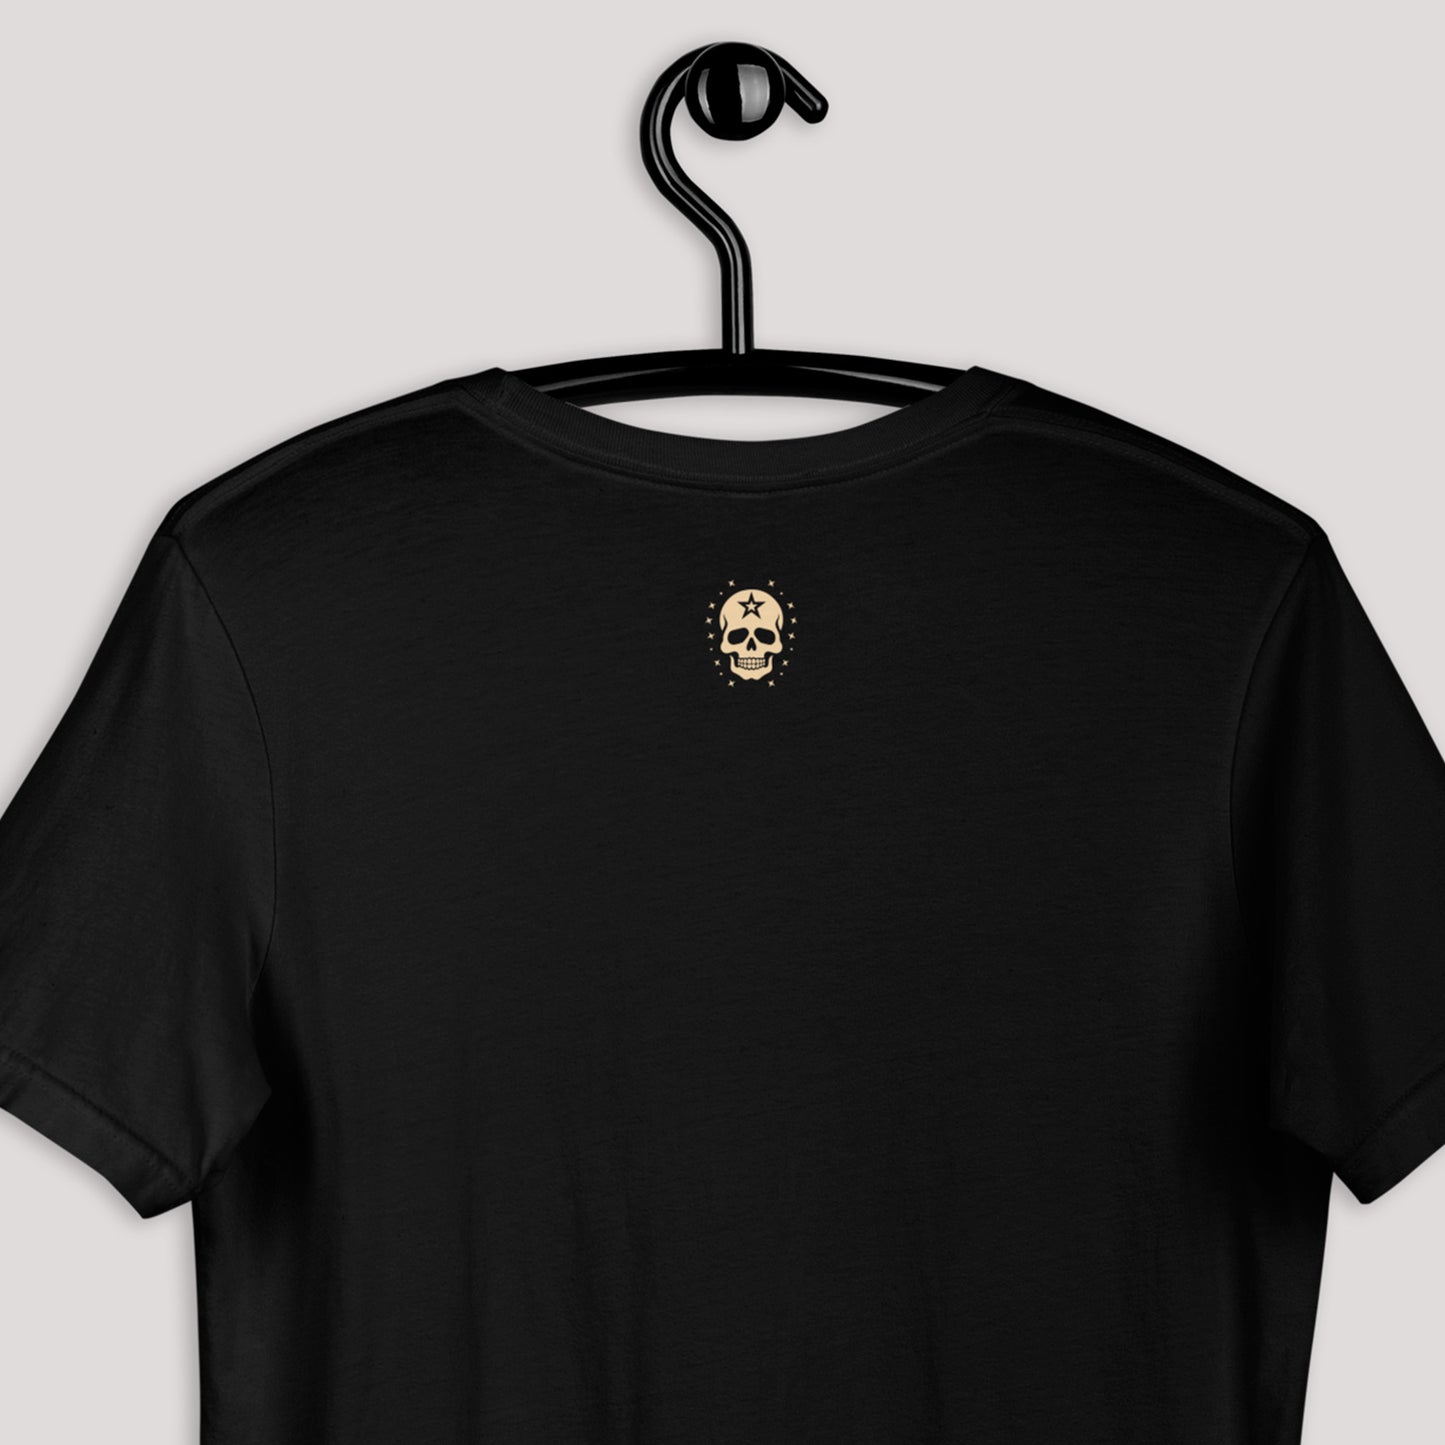 closeup of back view of black Anchor's Tale Unisex t-shirt displayed on a hanger